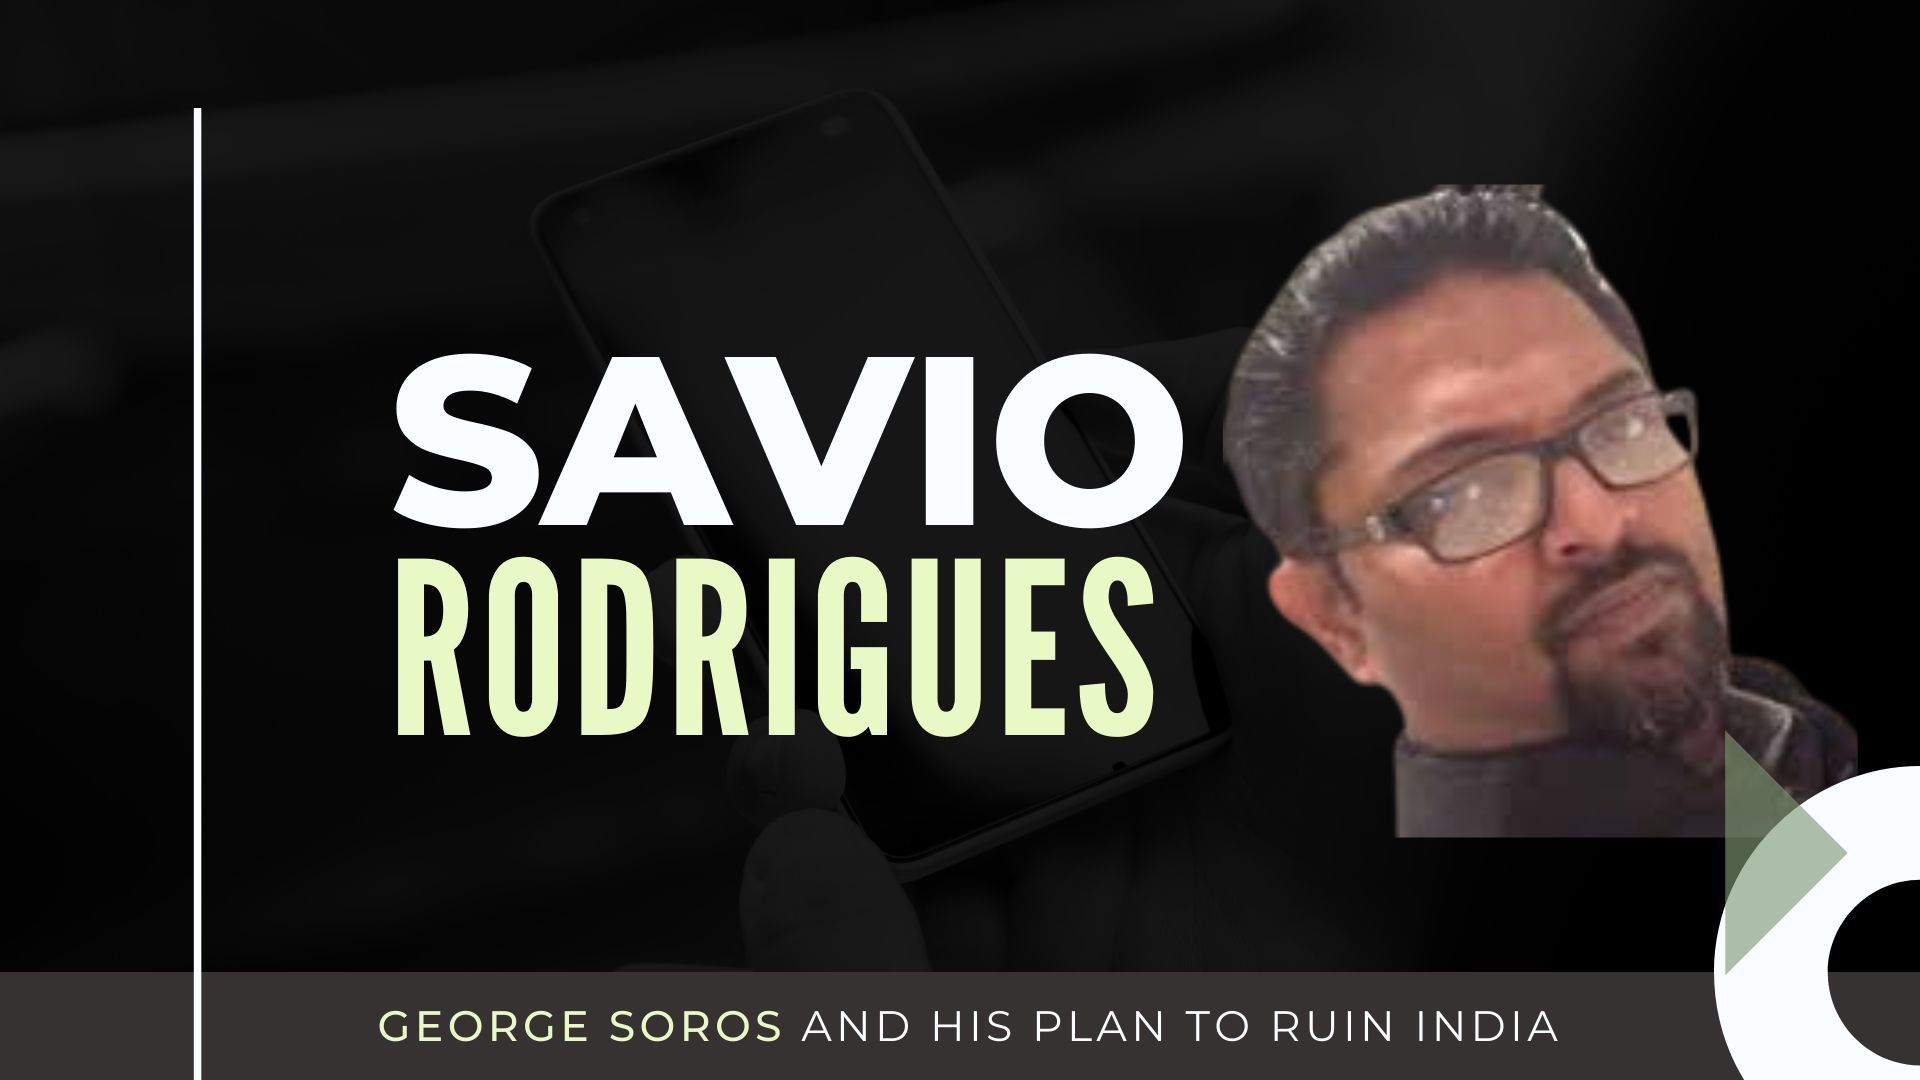 Terming George Soros an economic terrorist, Savio Rodrigues laments the fact that the Government of India has not rebutted point-by-point the fake claims made by Soros at Davos. In this age of Social Media, factual and prompt rebuttals are a must, feels Savio.